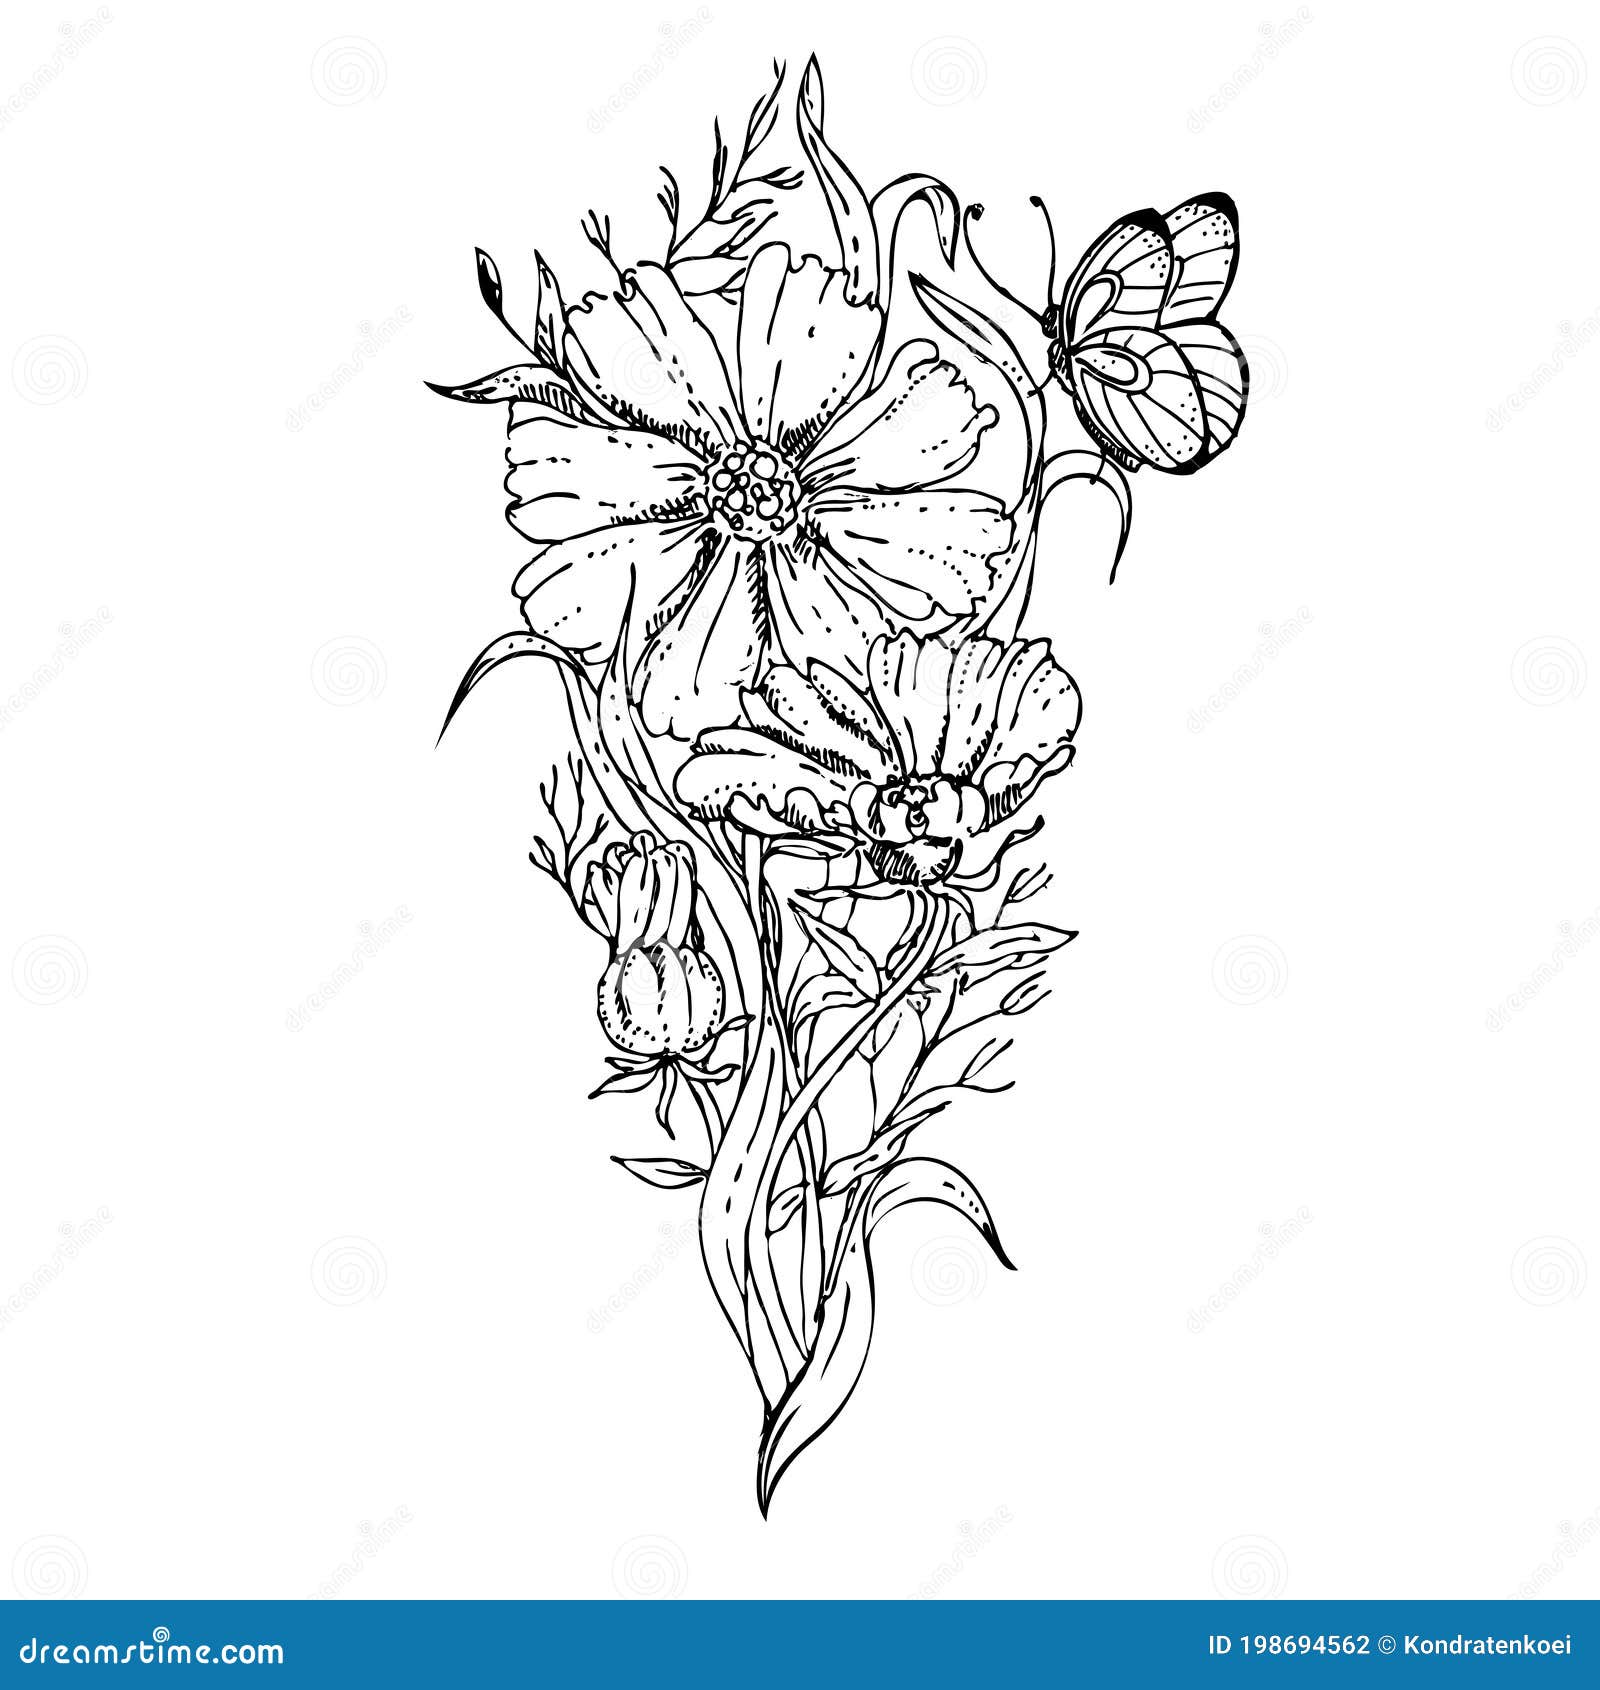 54 Classic Floral Tattoo Ideas for Spring  TattooBlend